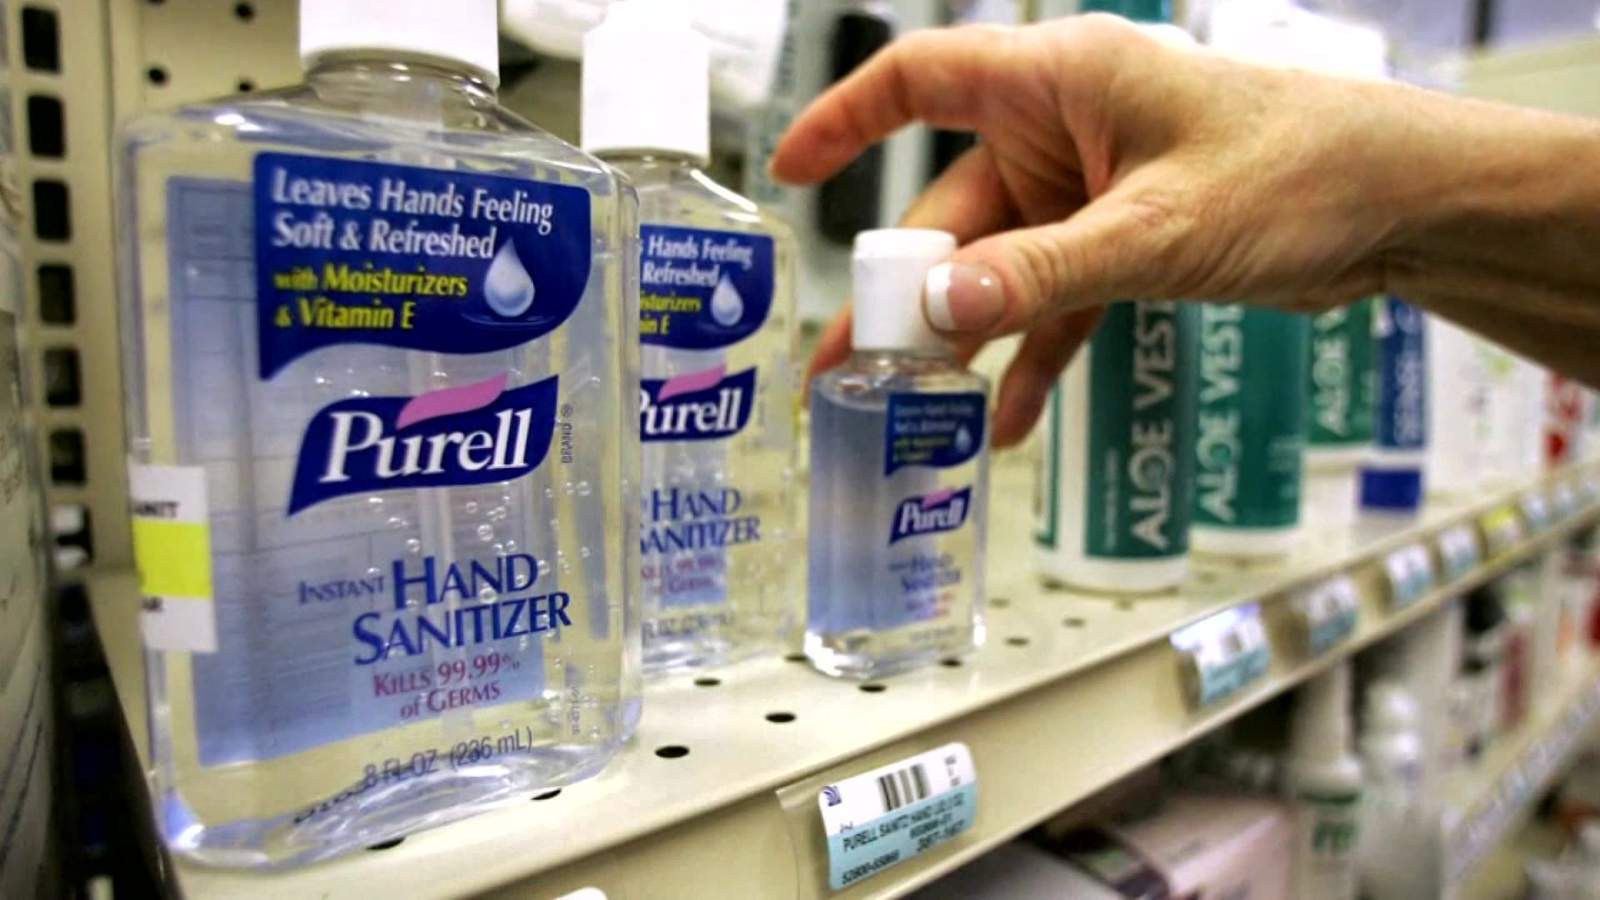 Will homemade hand sanitizer protect you?